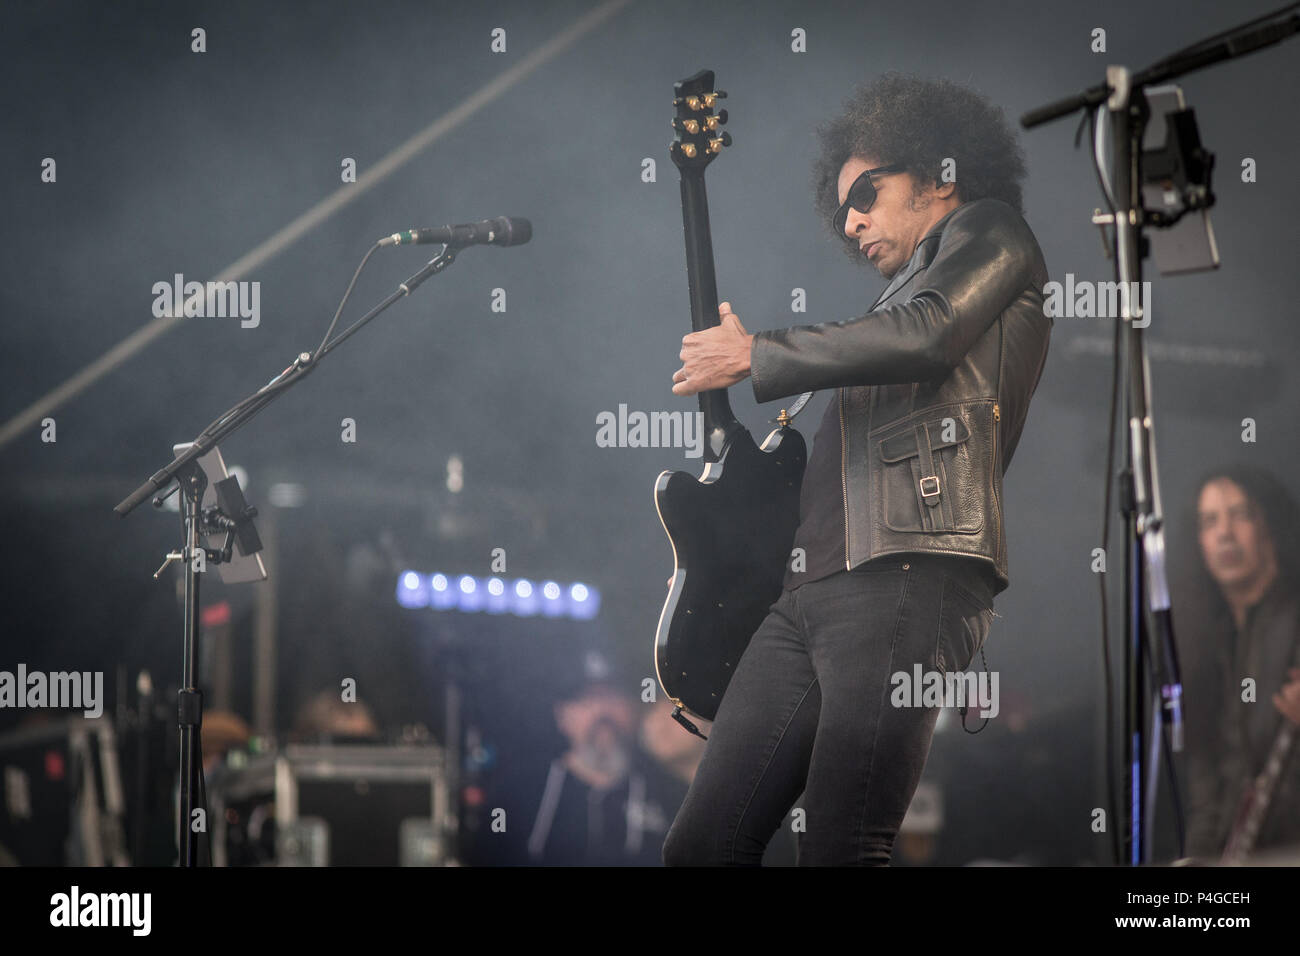 Denmark, Copenhagen - June 22, 2018. The American rock band Alice in Chains  performs a live concert during the Danish heavy metal festival Copenhell  2018 in Copenhagen. Here singer and guitarist William